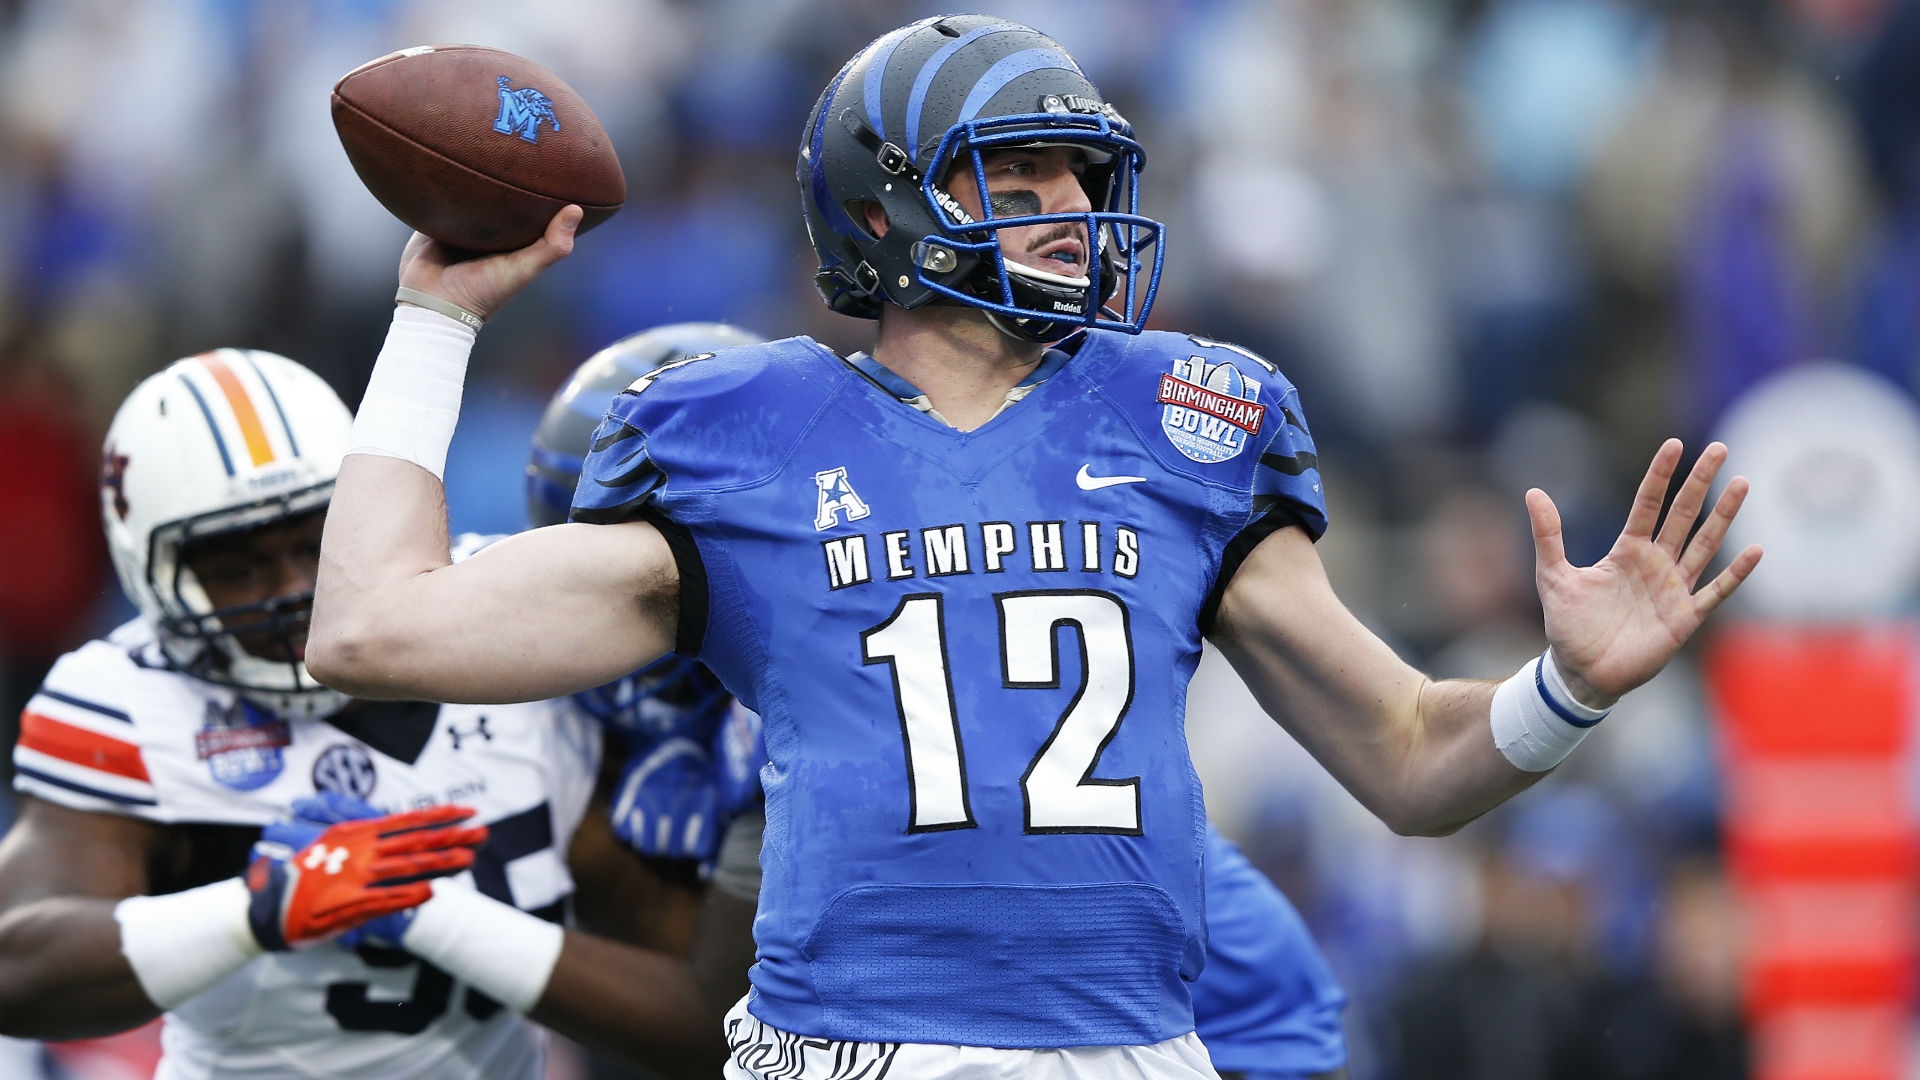 Paxton Lynch headed to NFL, projected to be first QB drafted